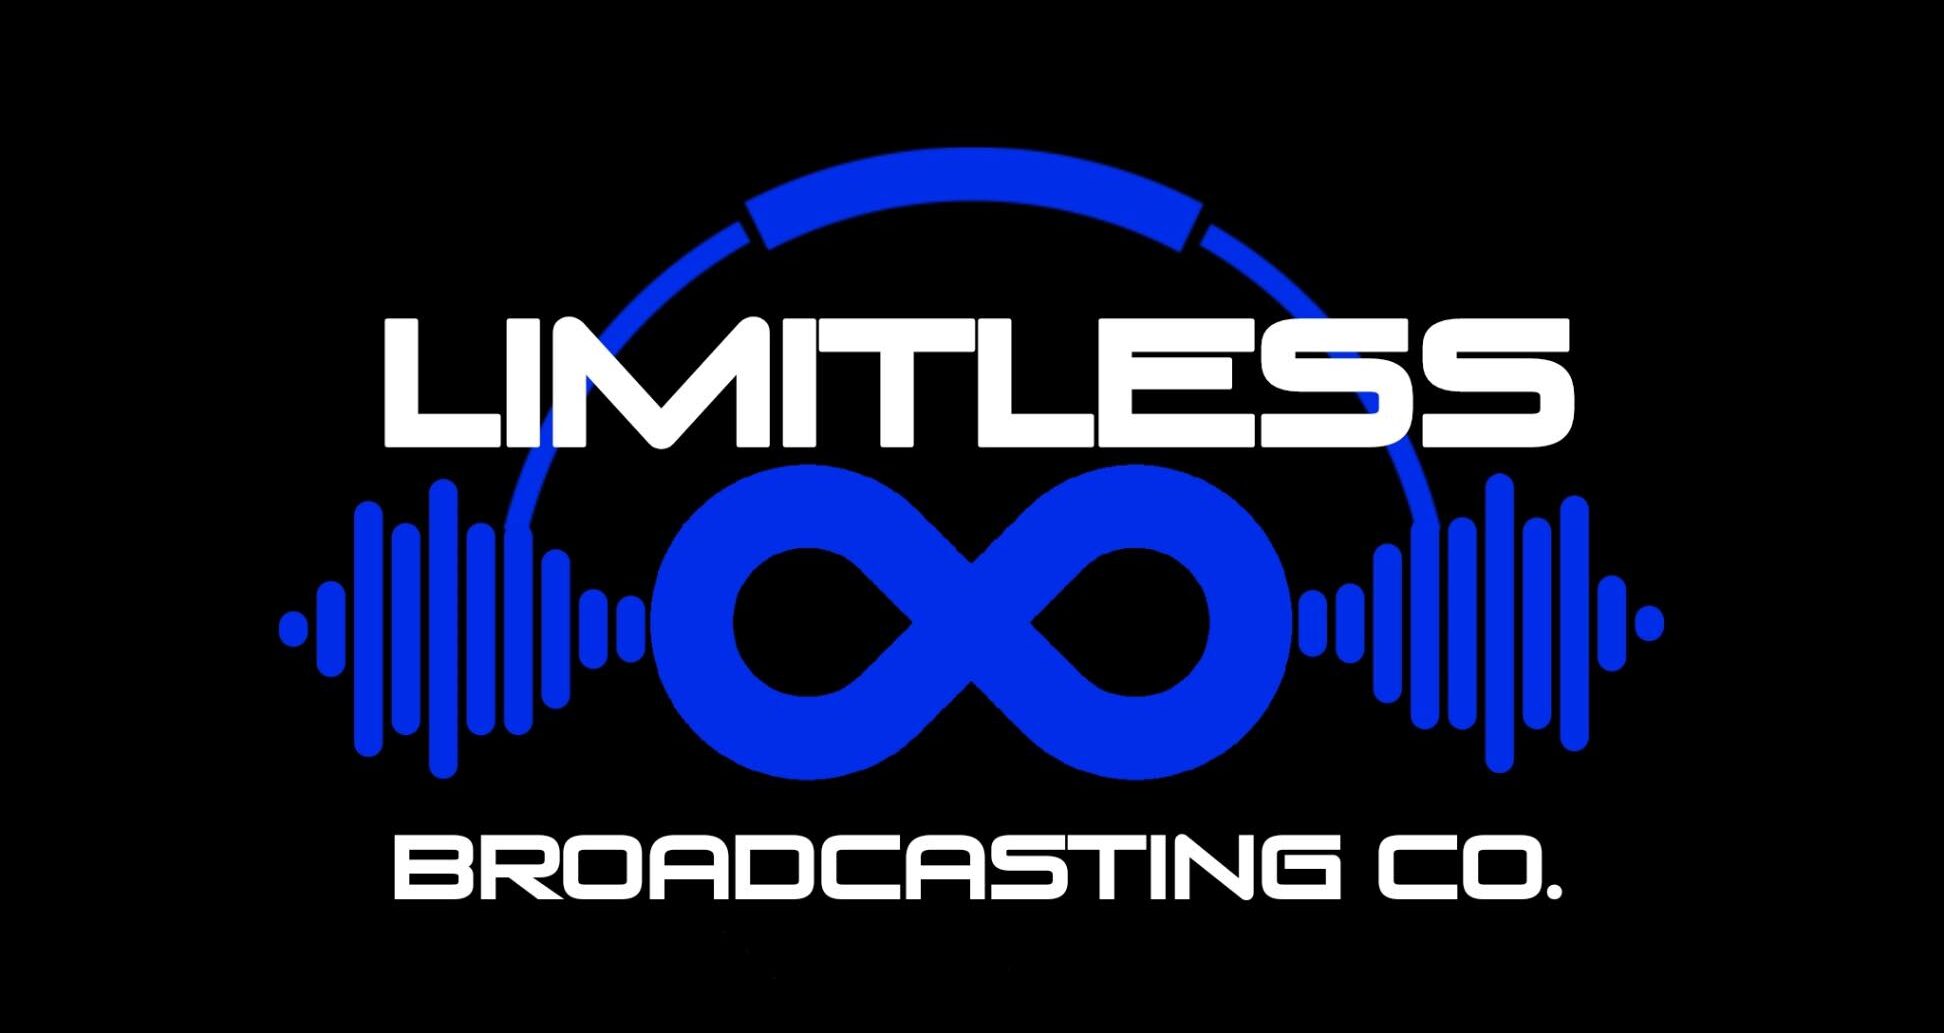 Limitless Broadcasting Network